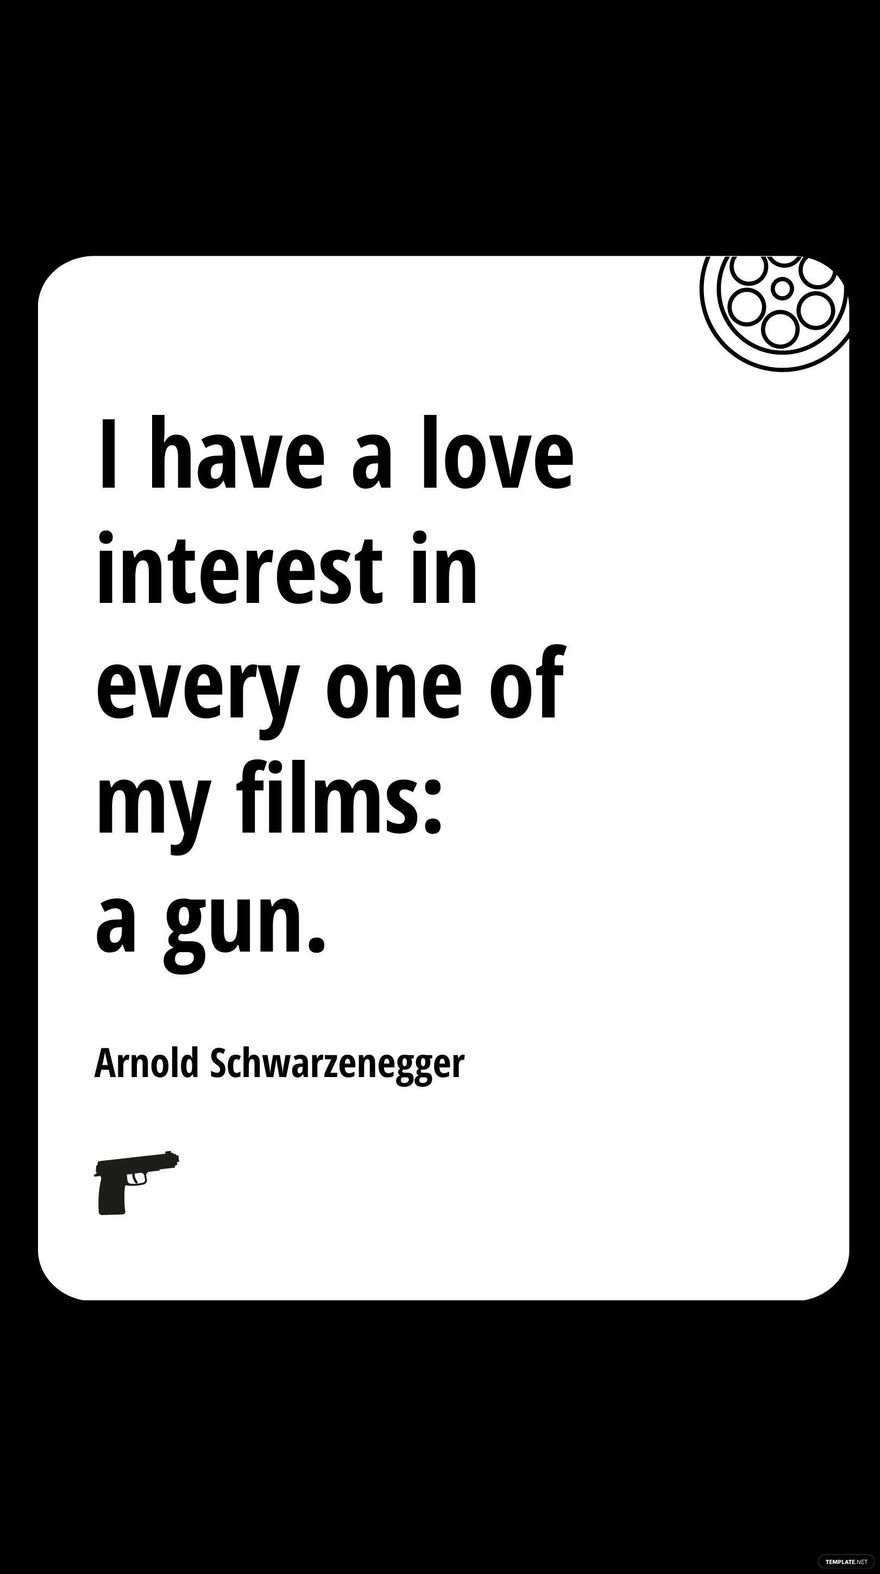 Free Arnold Schwarzenegger - I have a love interest in every one of my films: a gun. in JPG